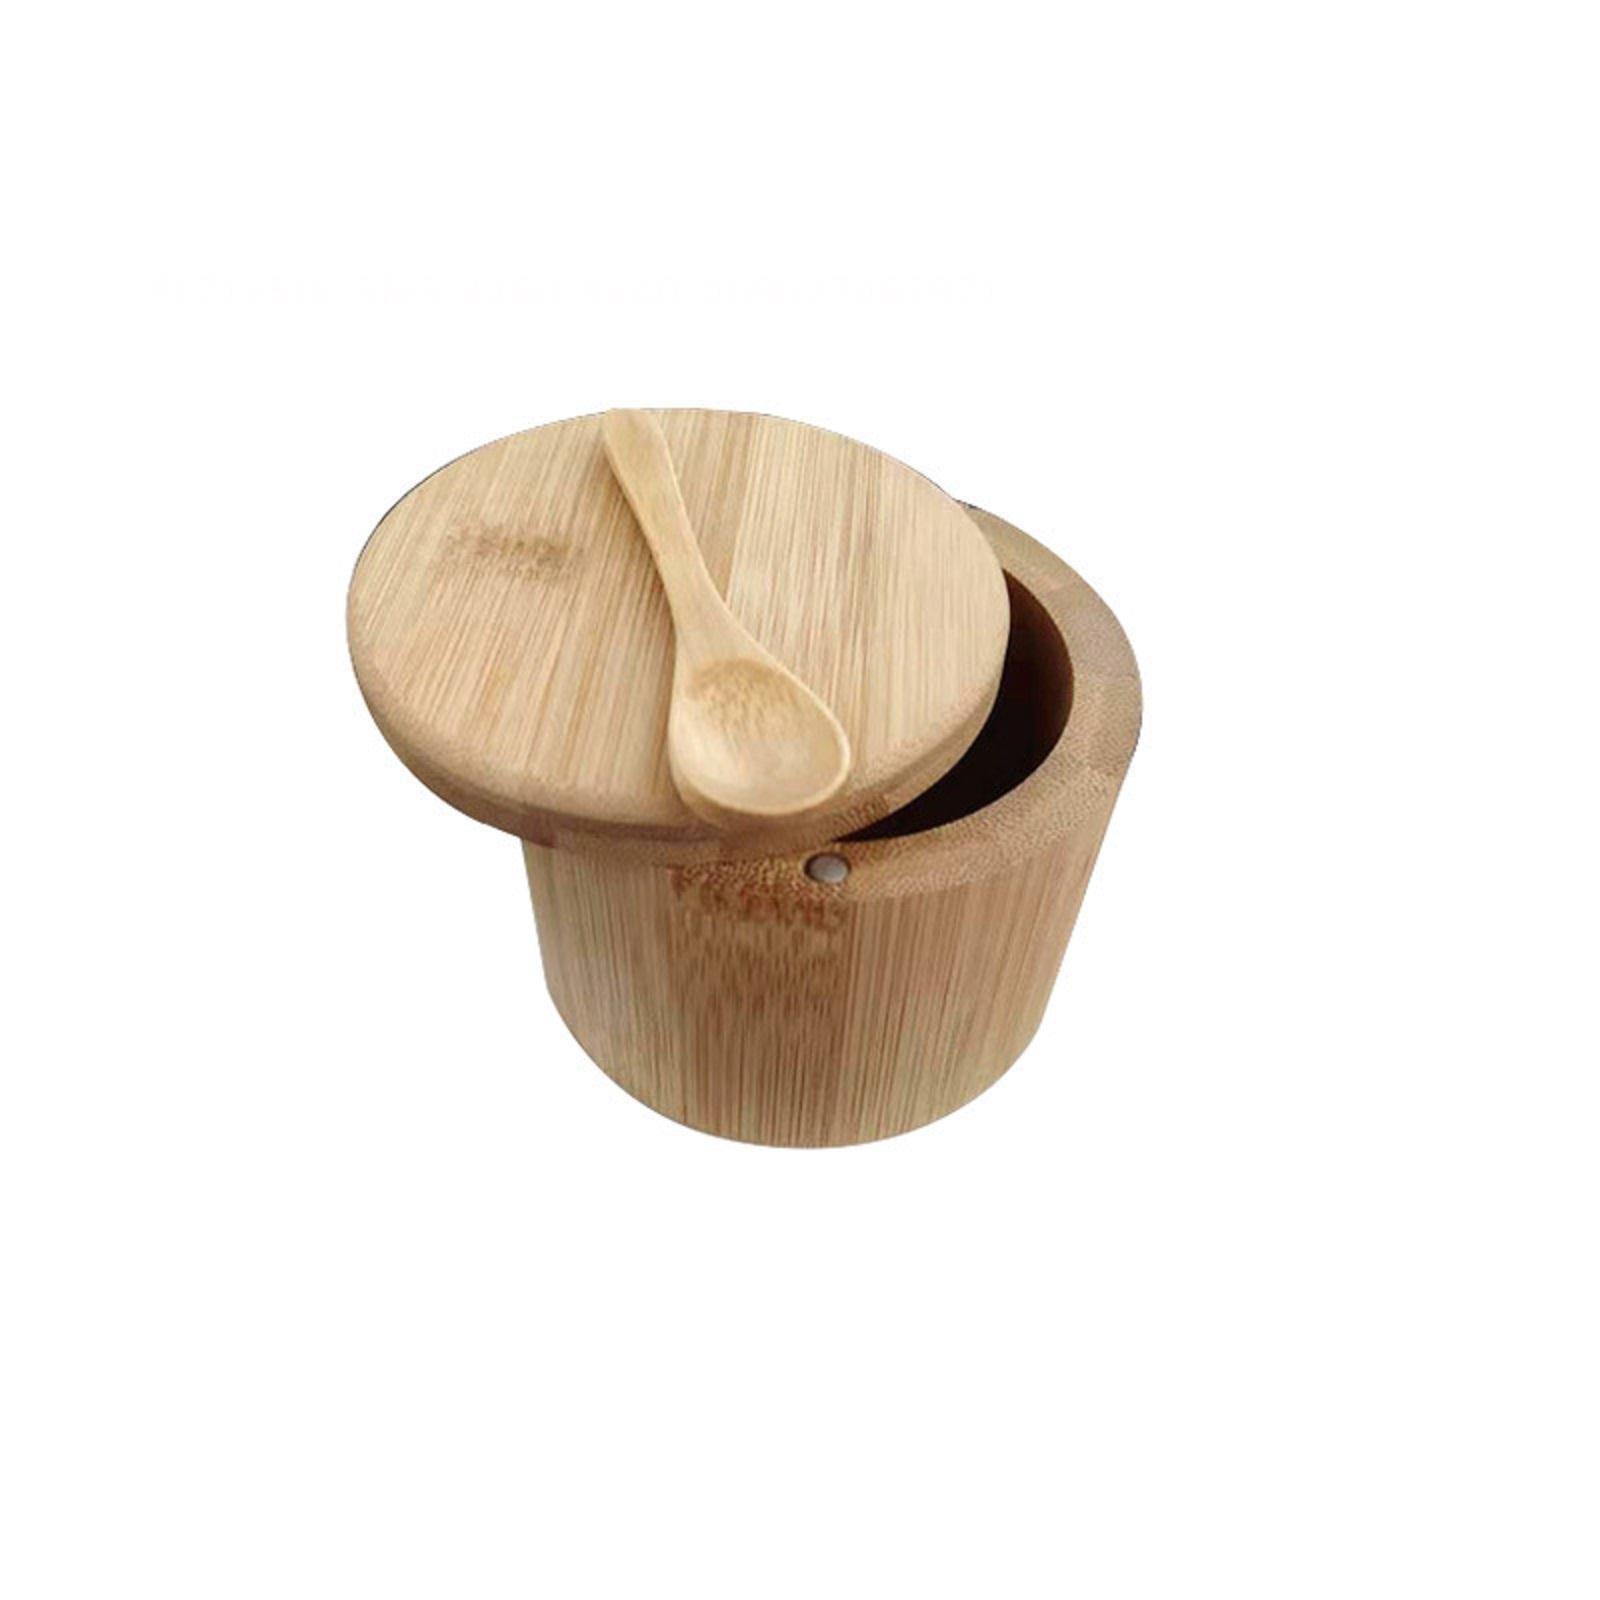 Bamboo Salt and Pepper Box, Salt Cellar with 2 Storage Compartments ...